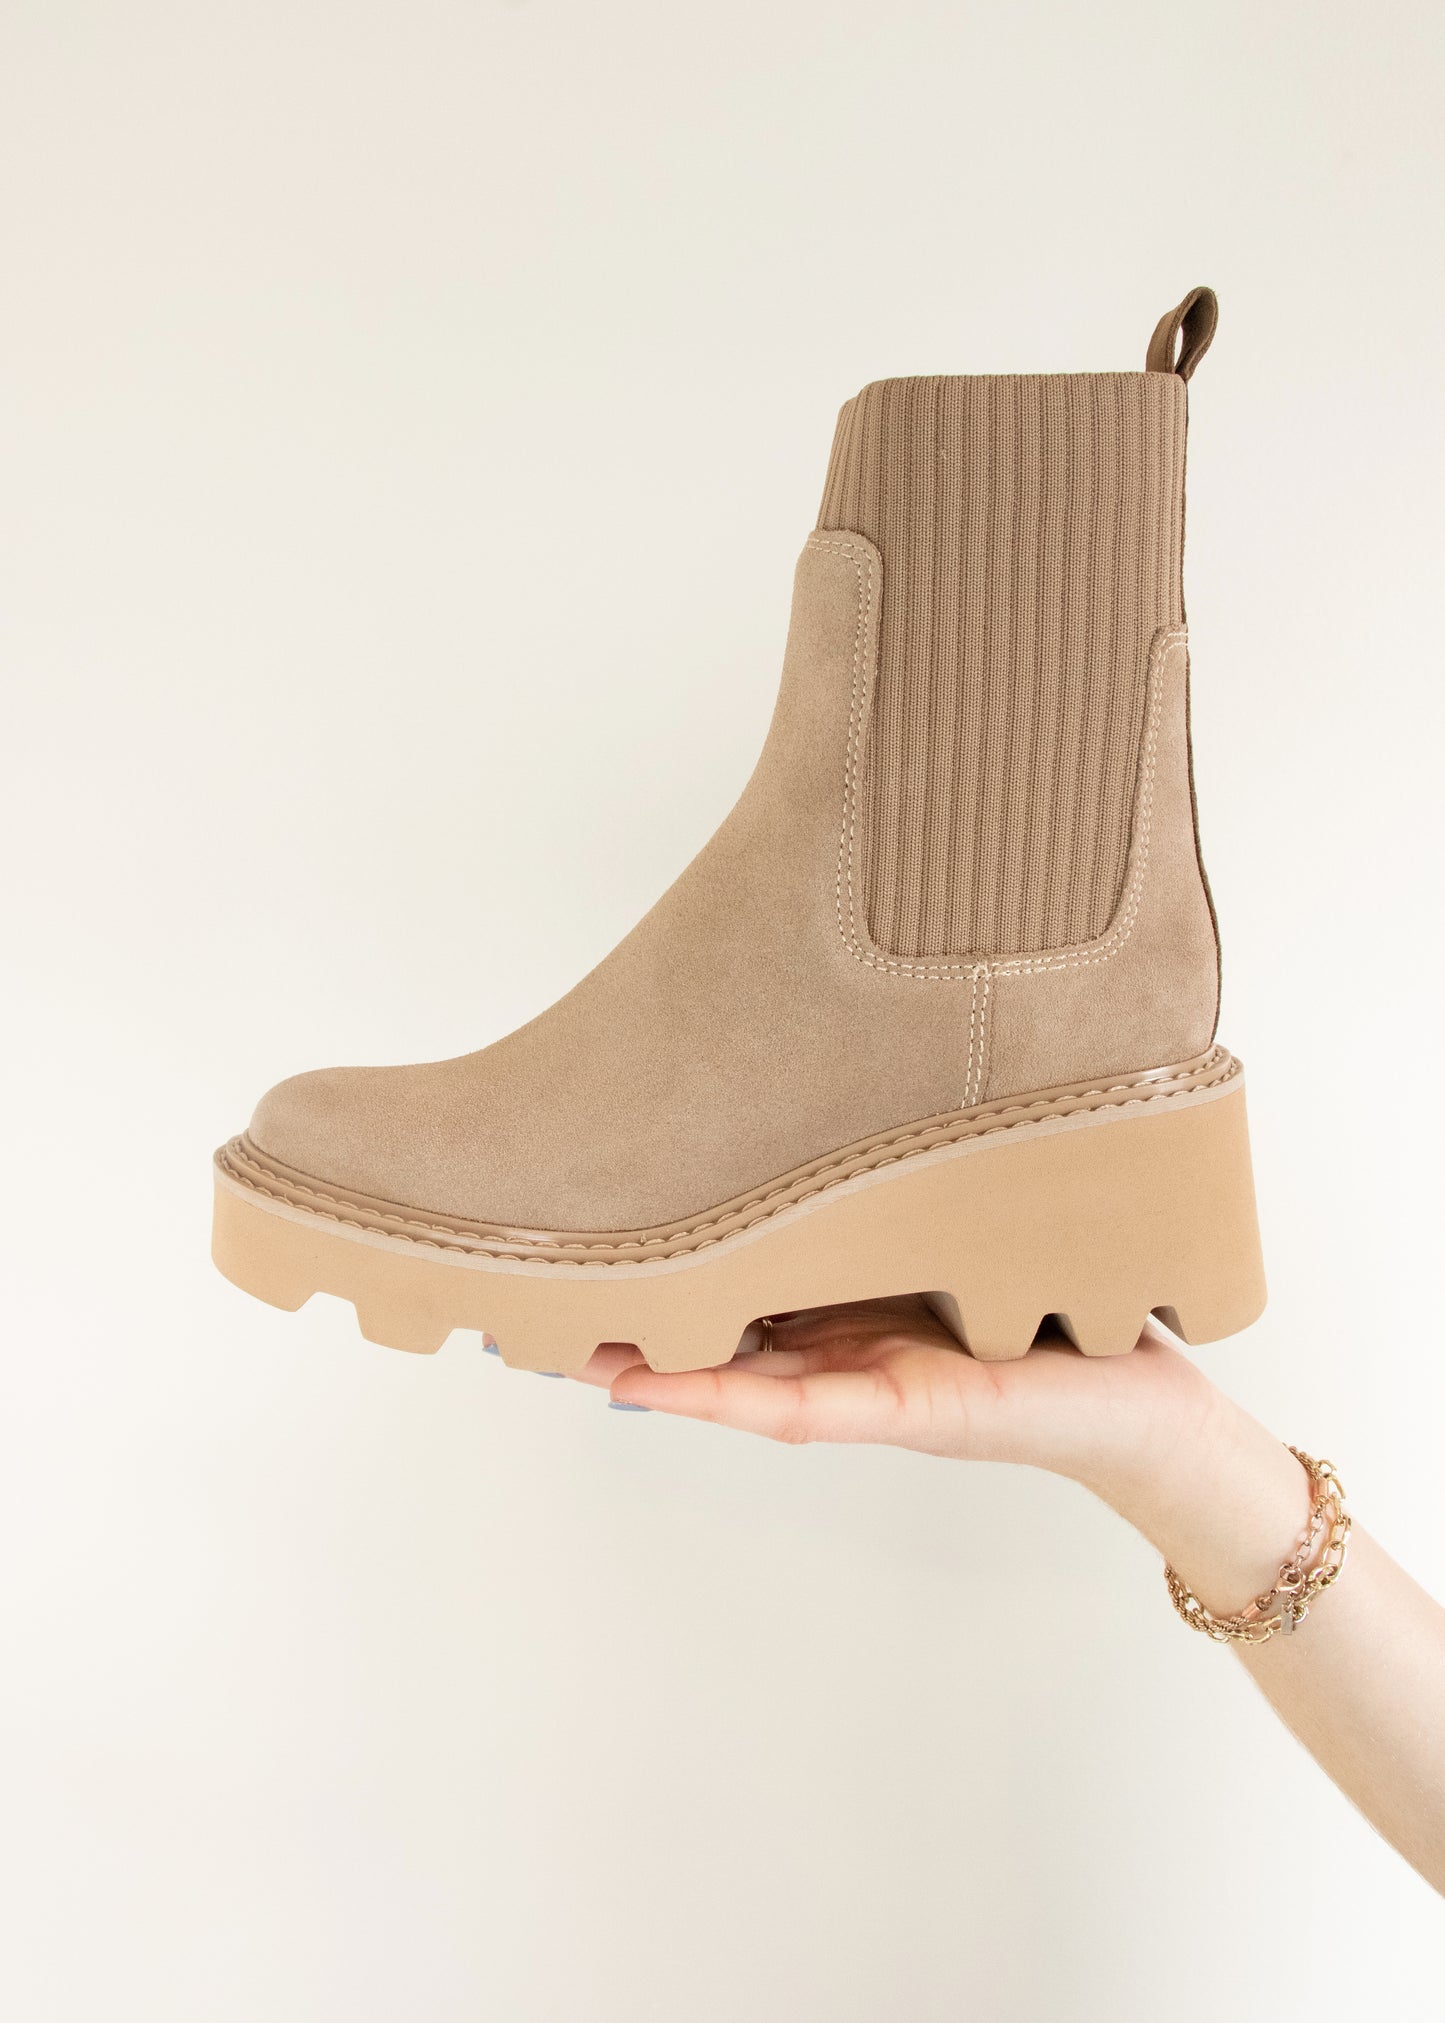 Dolce Vita HOVEN Boots - MUSHROOM SUEDE